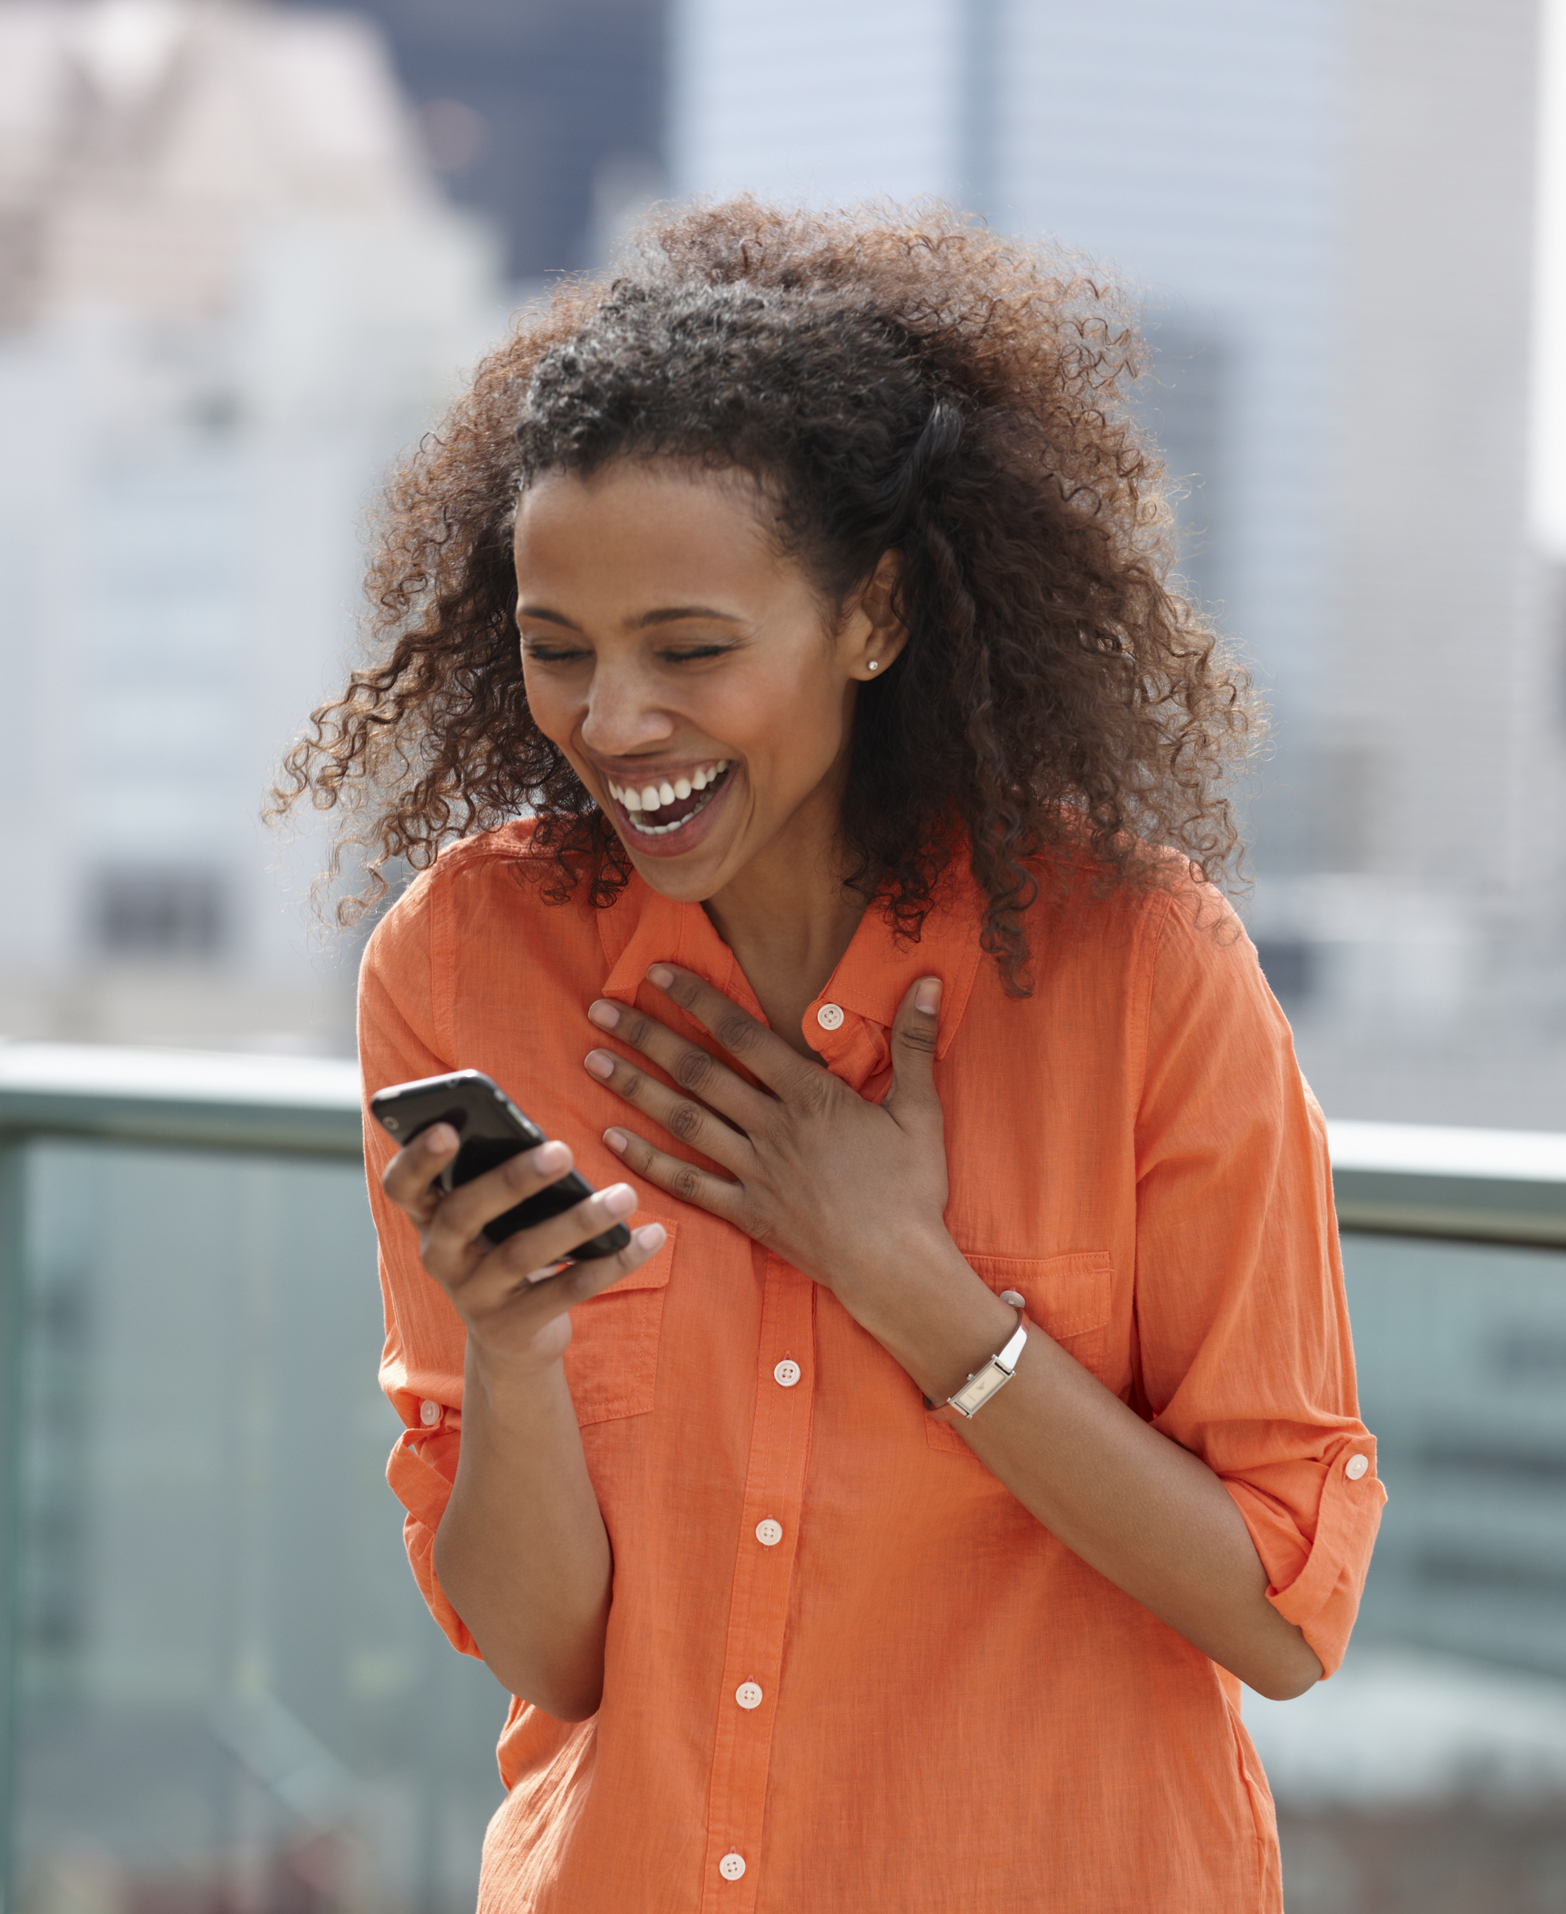 Laughing Black woman text messaging on cell phone